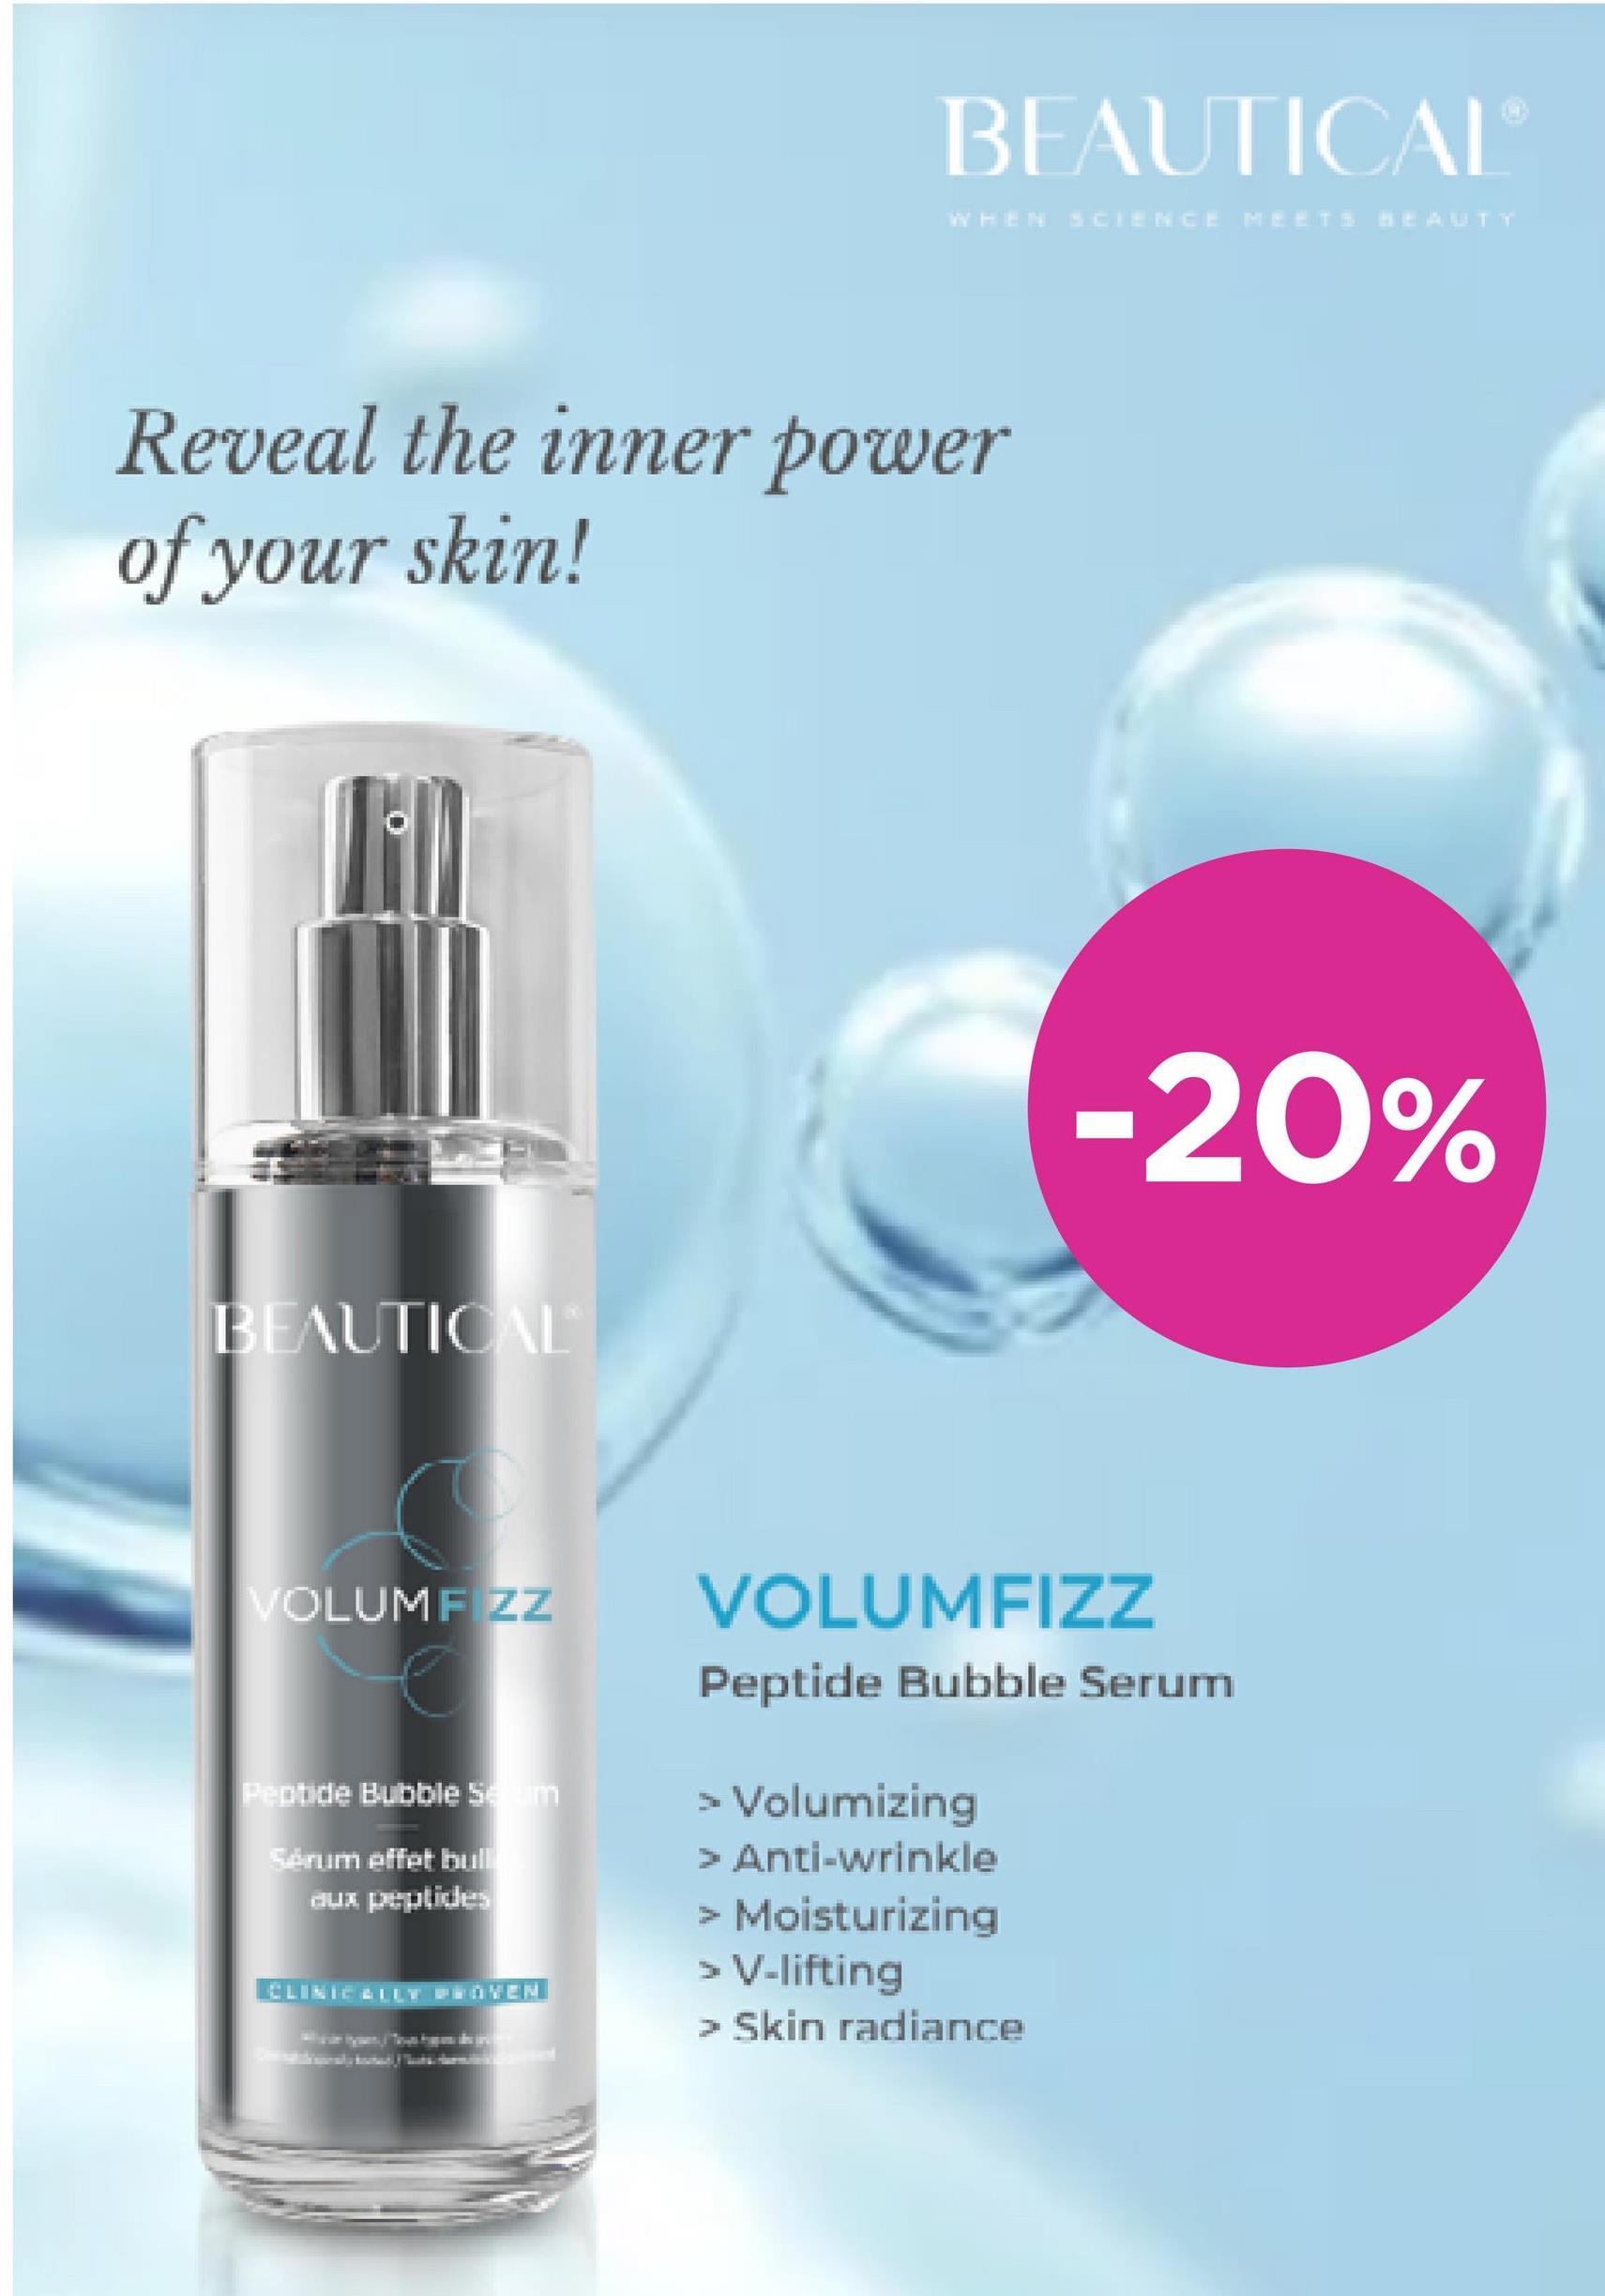 BEAUTICAL
WHEN SCIENCE MEETS BEAUTY
-20%
Reveal the inner power
of your skin!
BEAUTICAL
VOLUMF ZZ
Peptide Bubble Seum
Senum effet hull
aux peptides
201
VOLUMFIZZ
Peptide Bubble Serum
> Volumizing
> Anti-wrinkle
> Moisturizing
> V-lifting
> Skin radiance